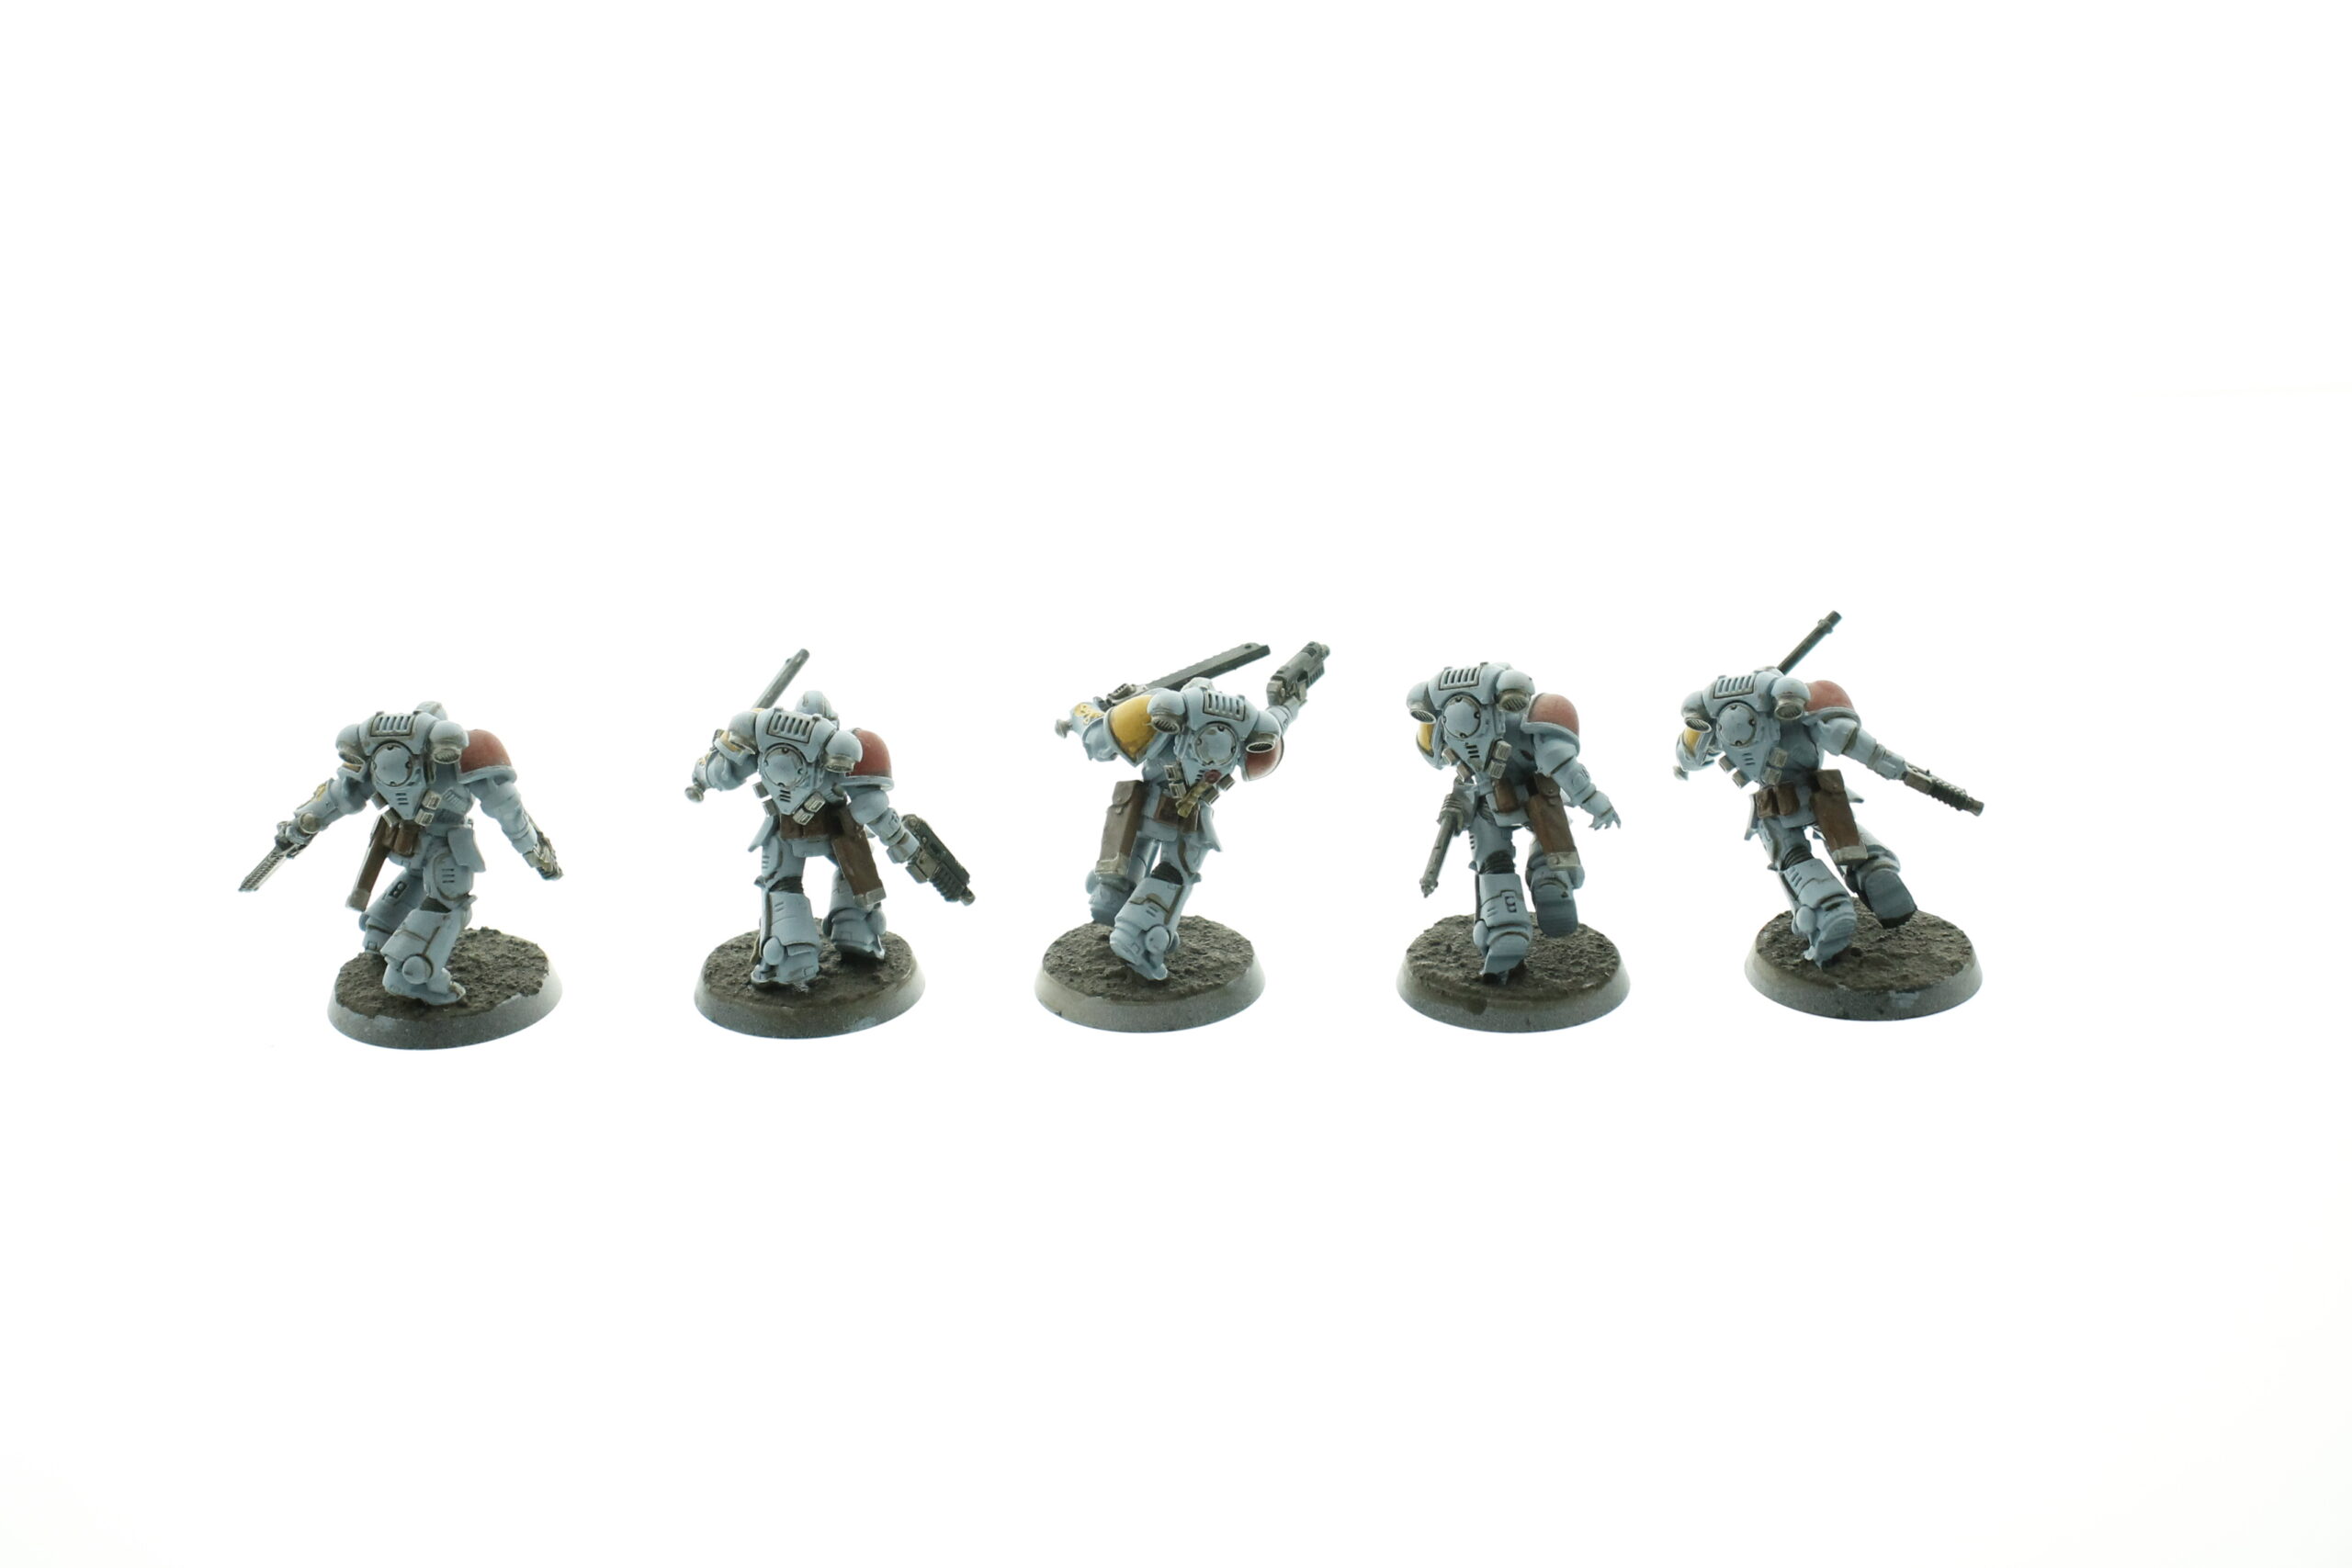 Warhammer 40.000 Space Wolves Reivers | WHTREASURY